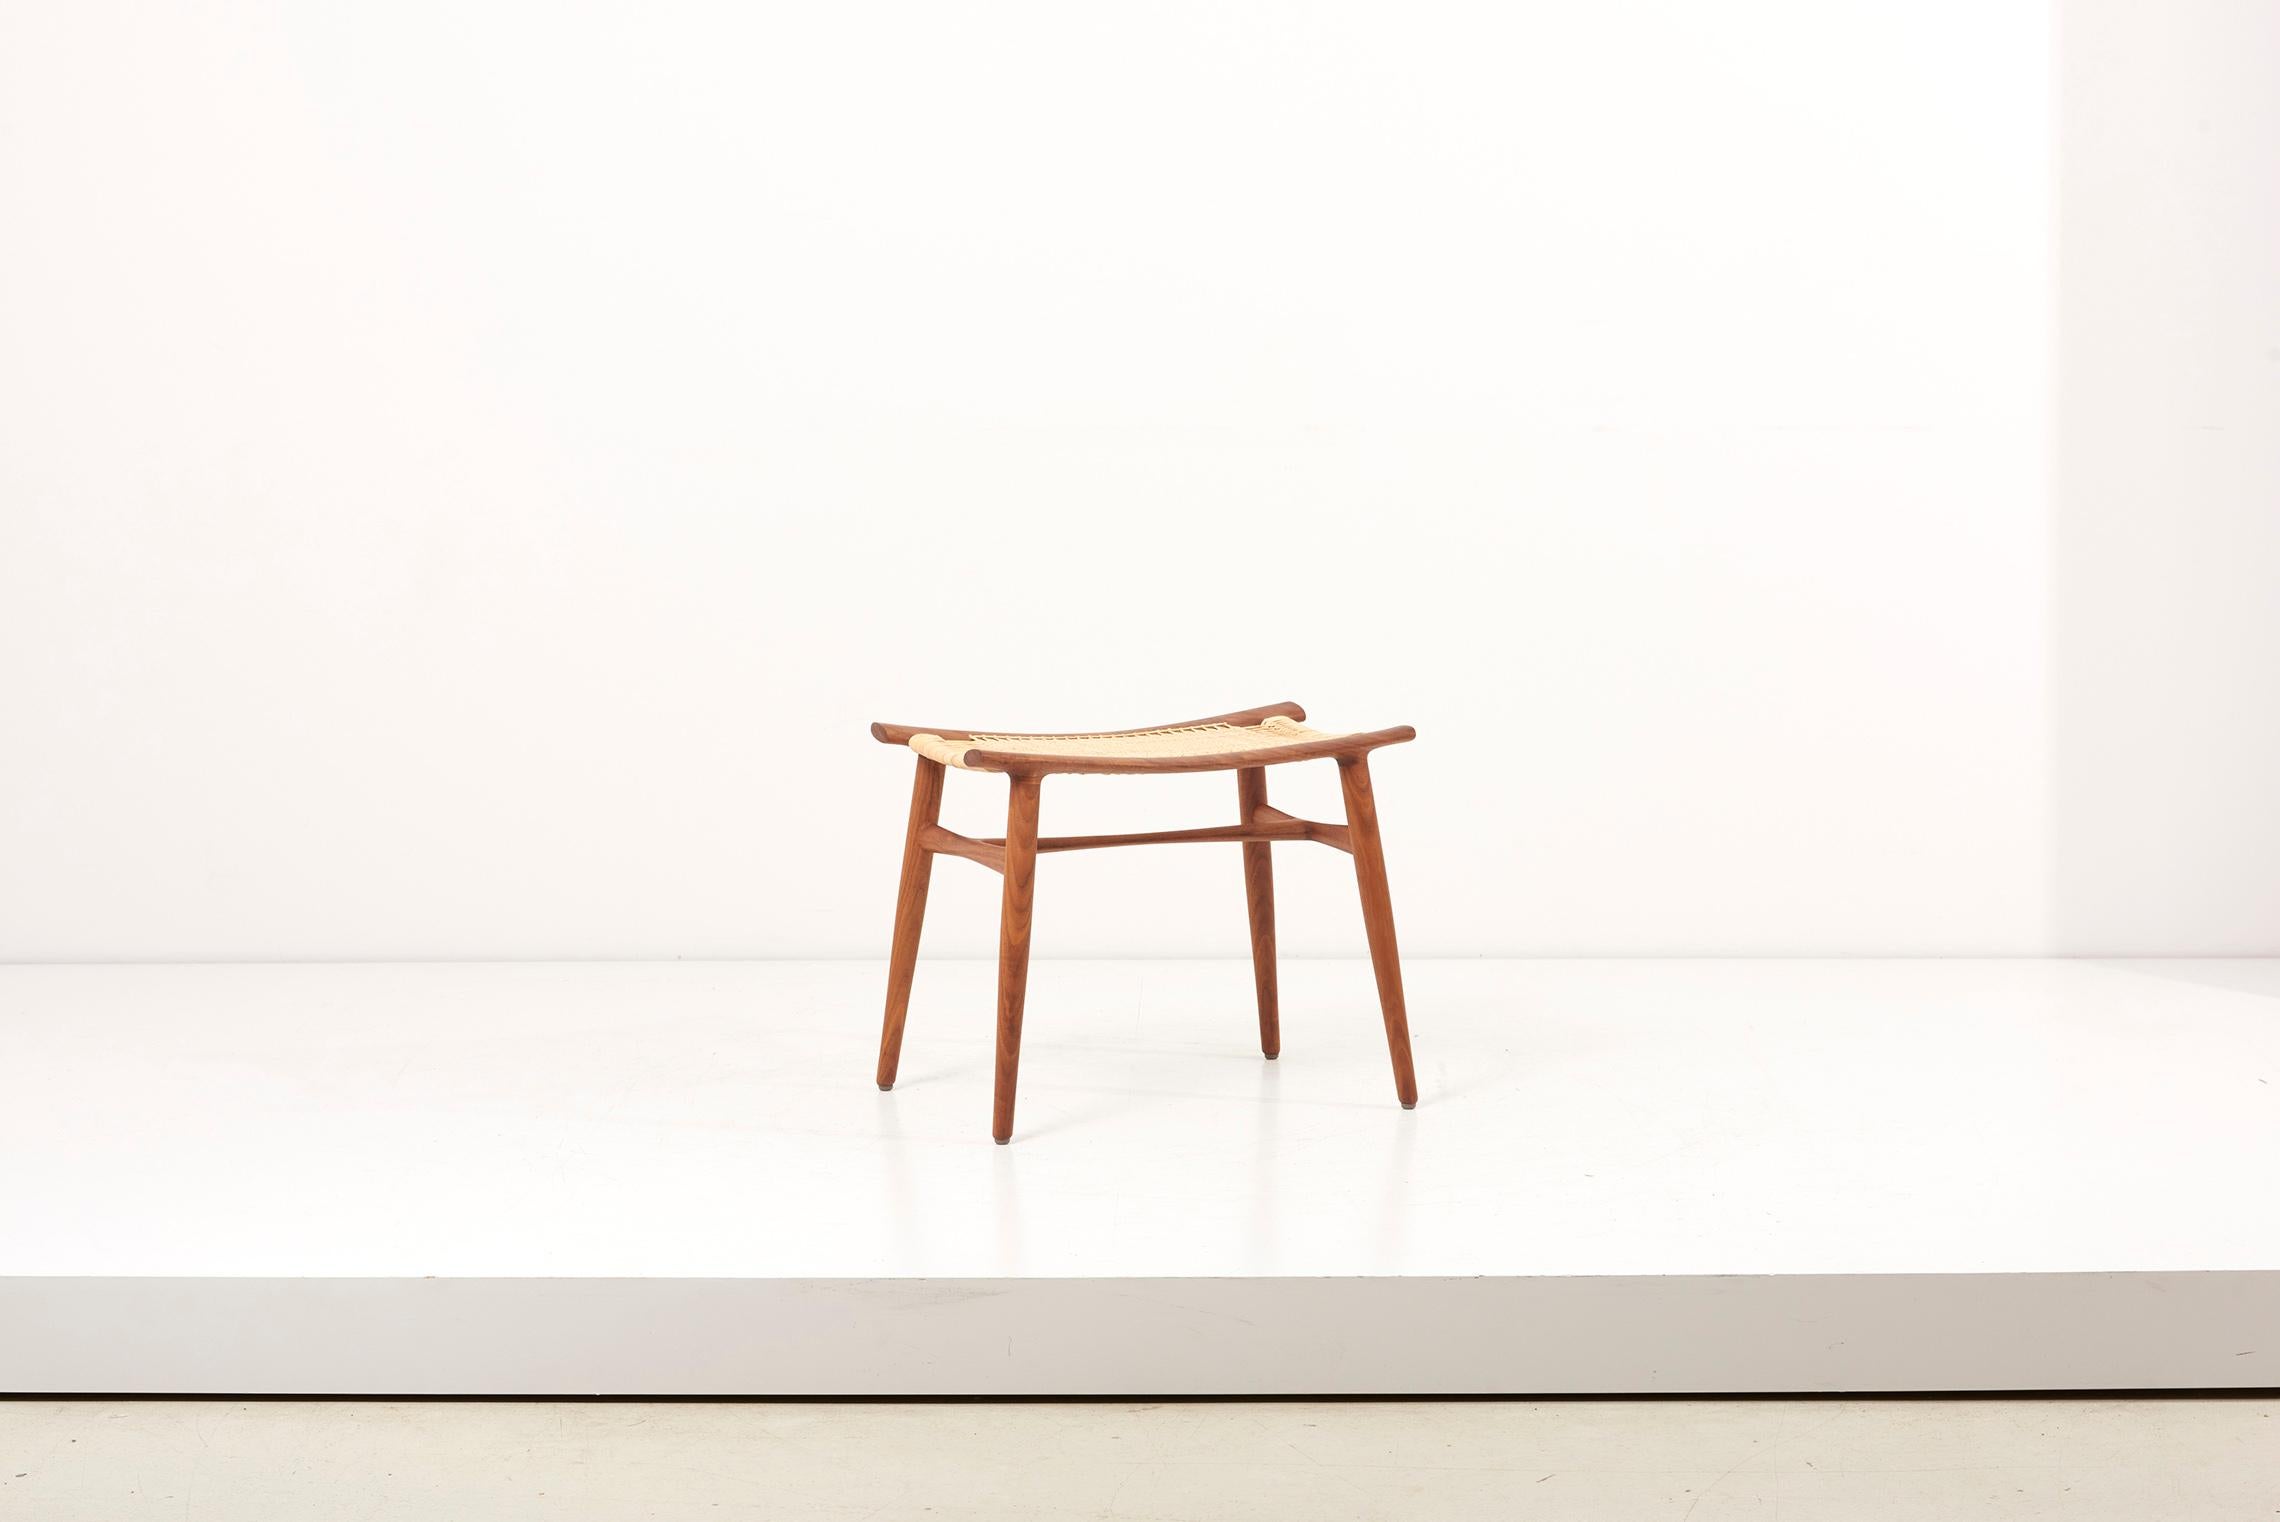 Hand-crafted stool by Japanese designer Hokuto Sekine. The legs and frame are made in walnut while the seat consists of high-quality rattan.